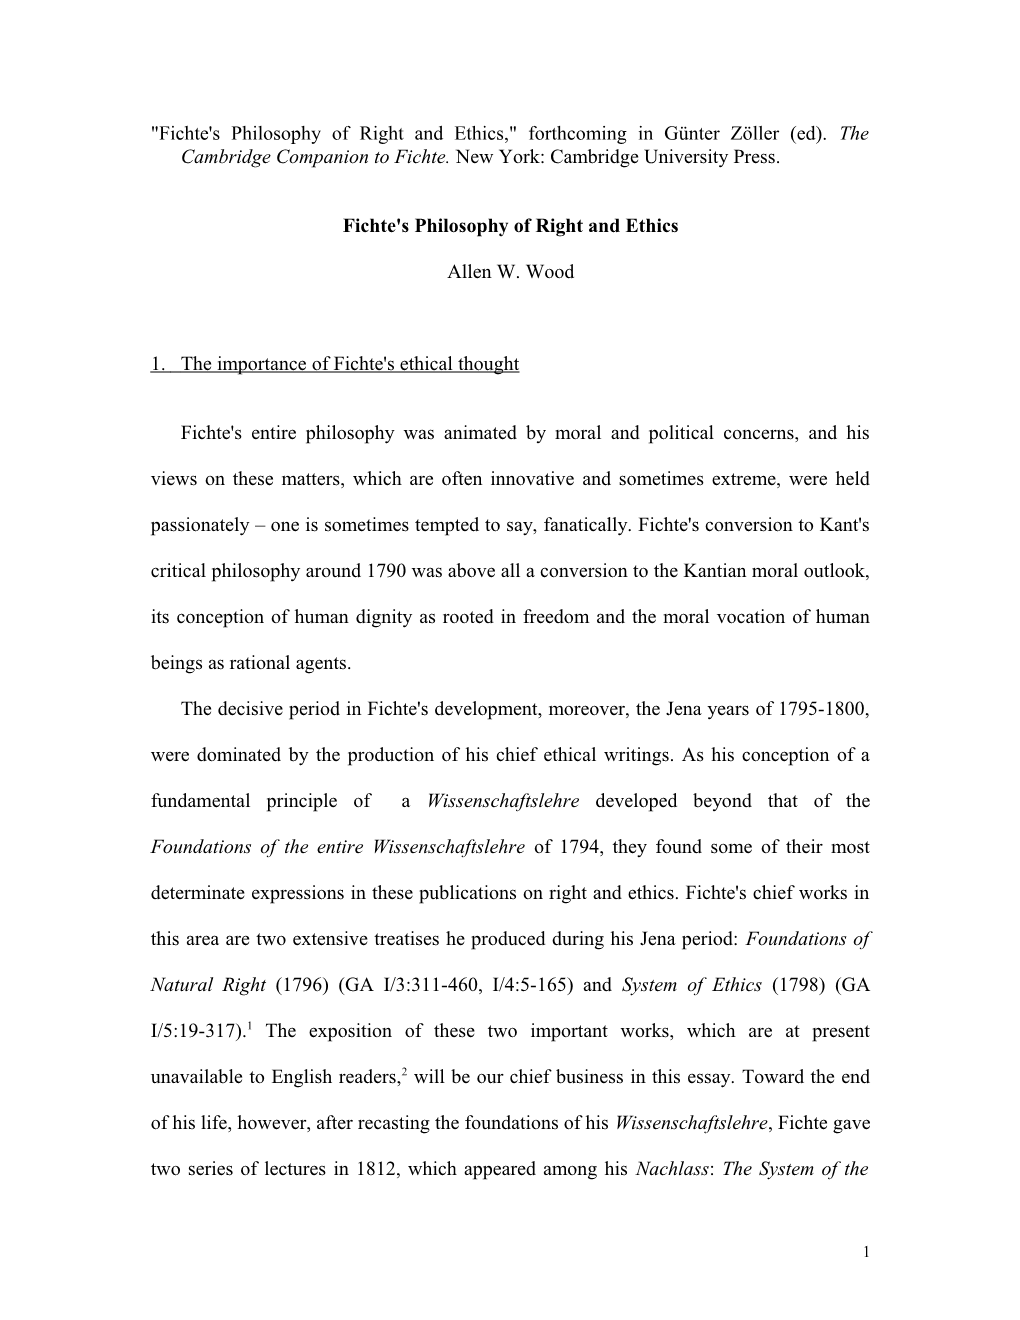 Fichte's Philosophy of Right and Ethics